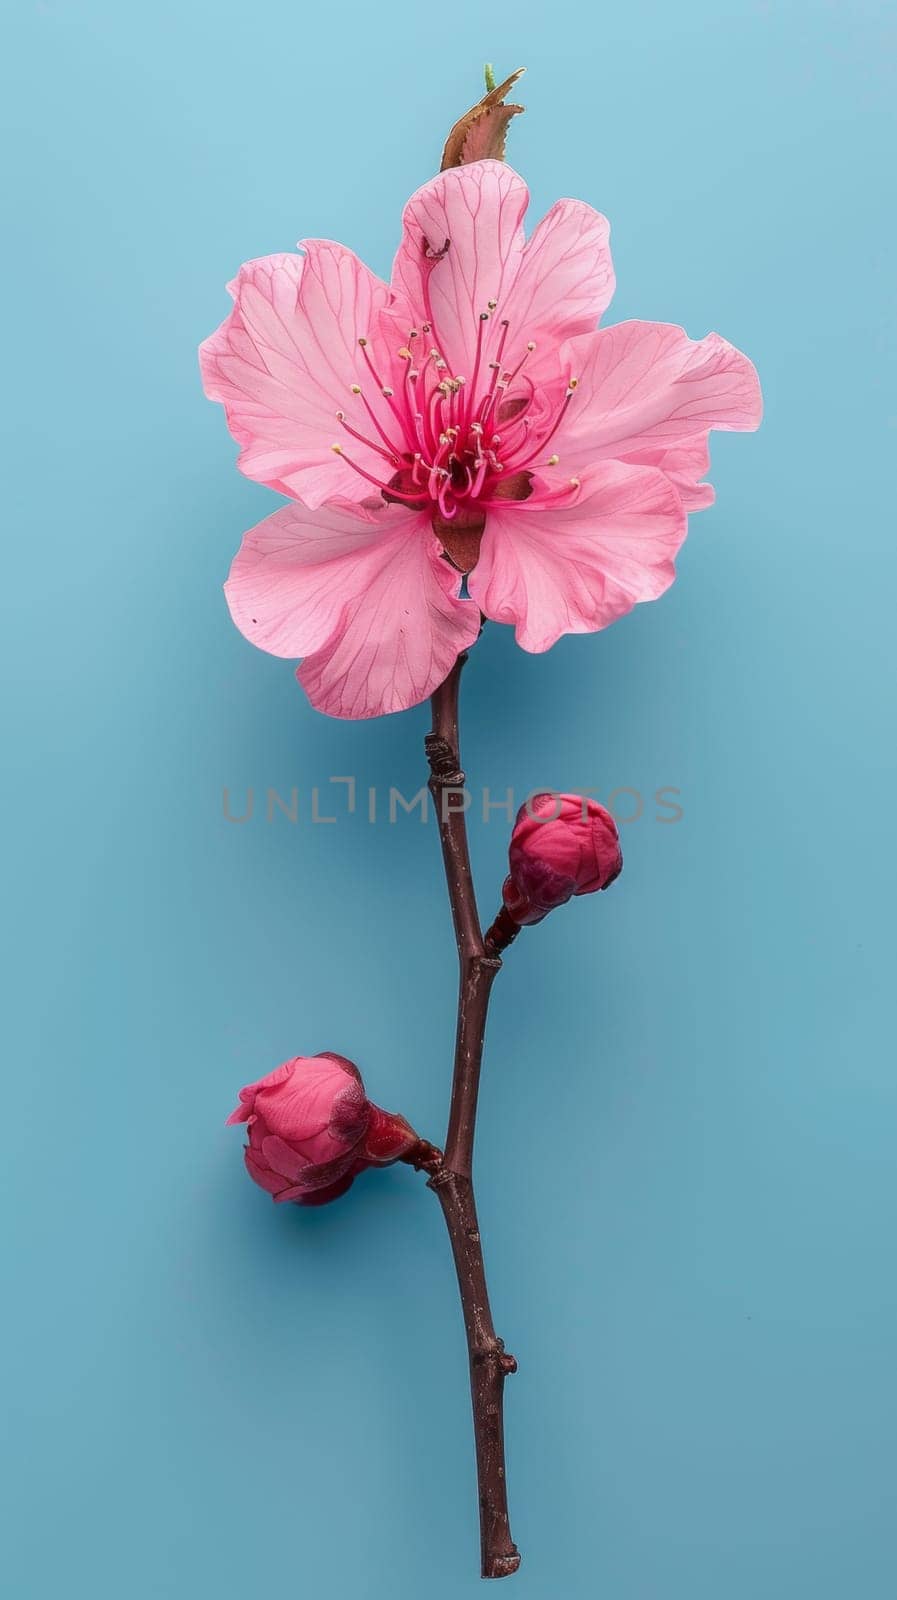 A pink flower on a branch with leaves and stem